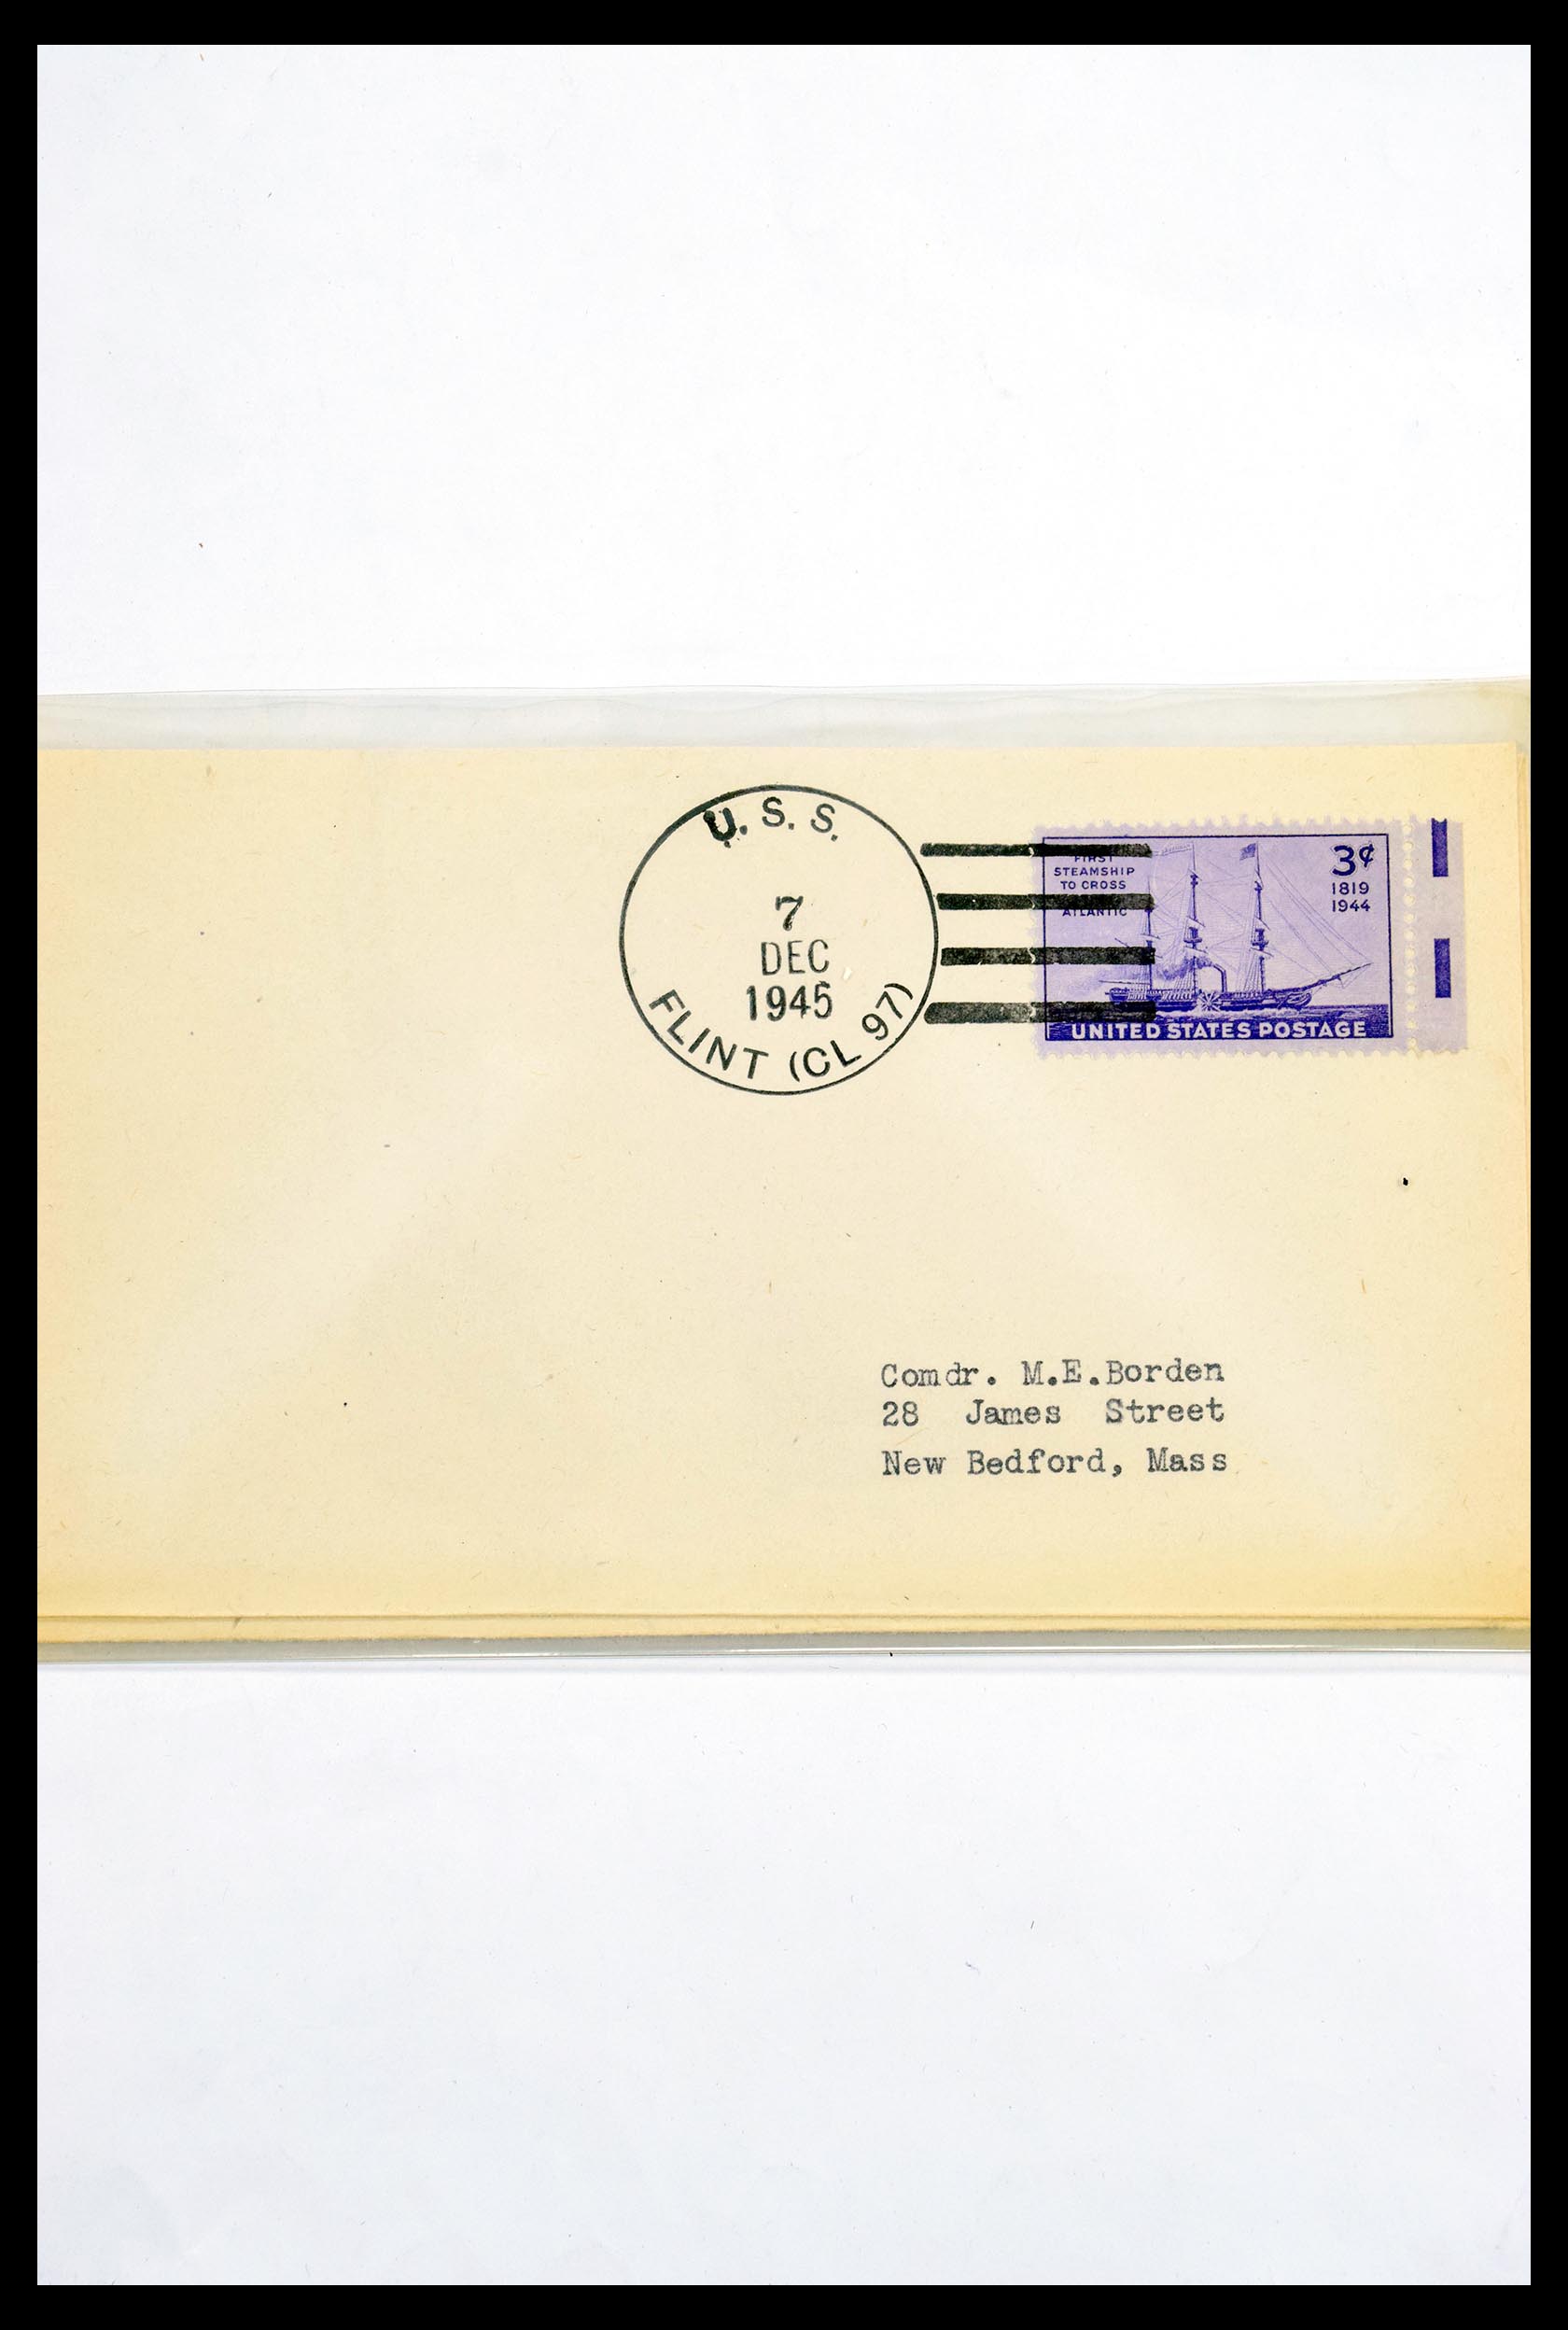 30341 312 - 30341 USA naval cover collection 1930-1970.